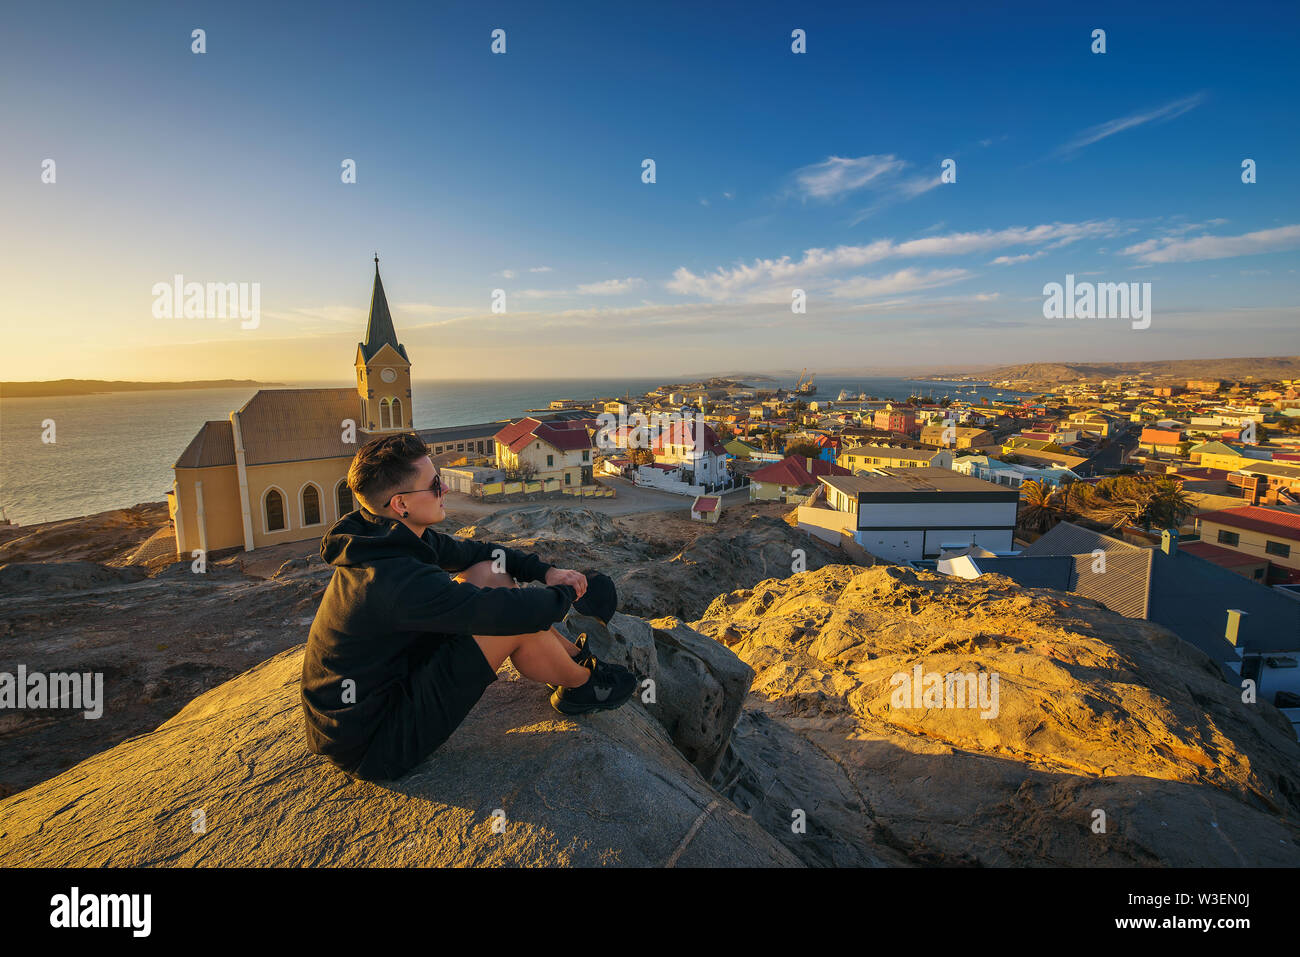 Tourist on top of a hill enjoys the view of Luderitz in Namibia at sunset Stock Photo